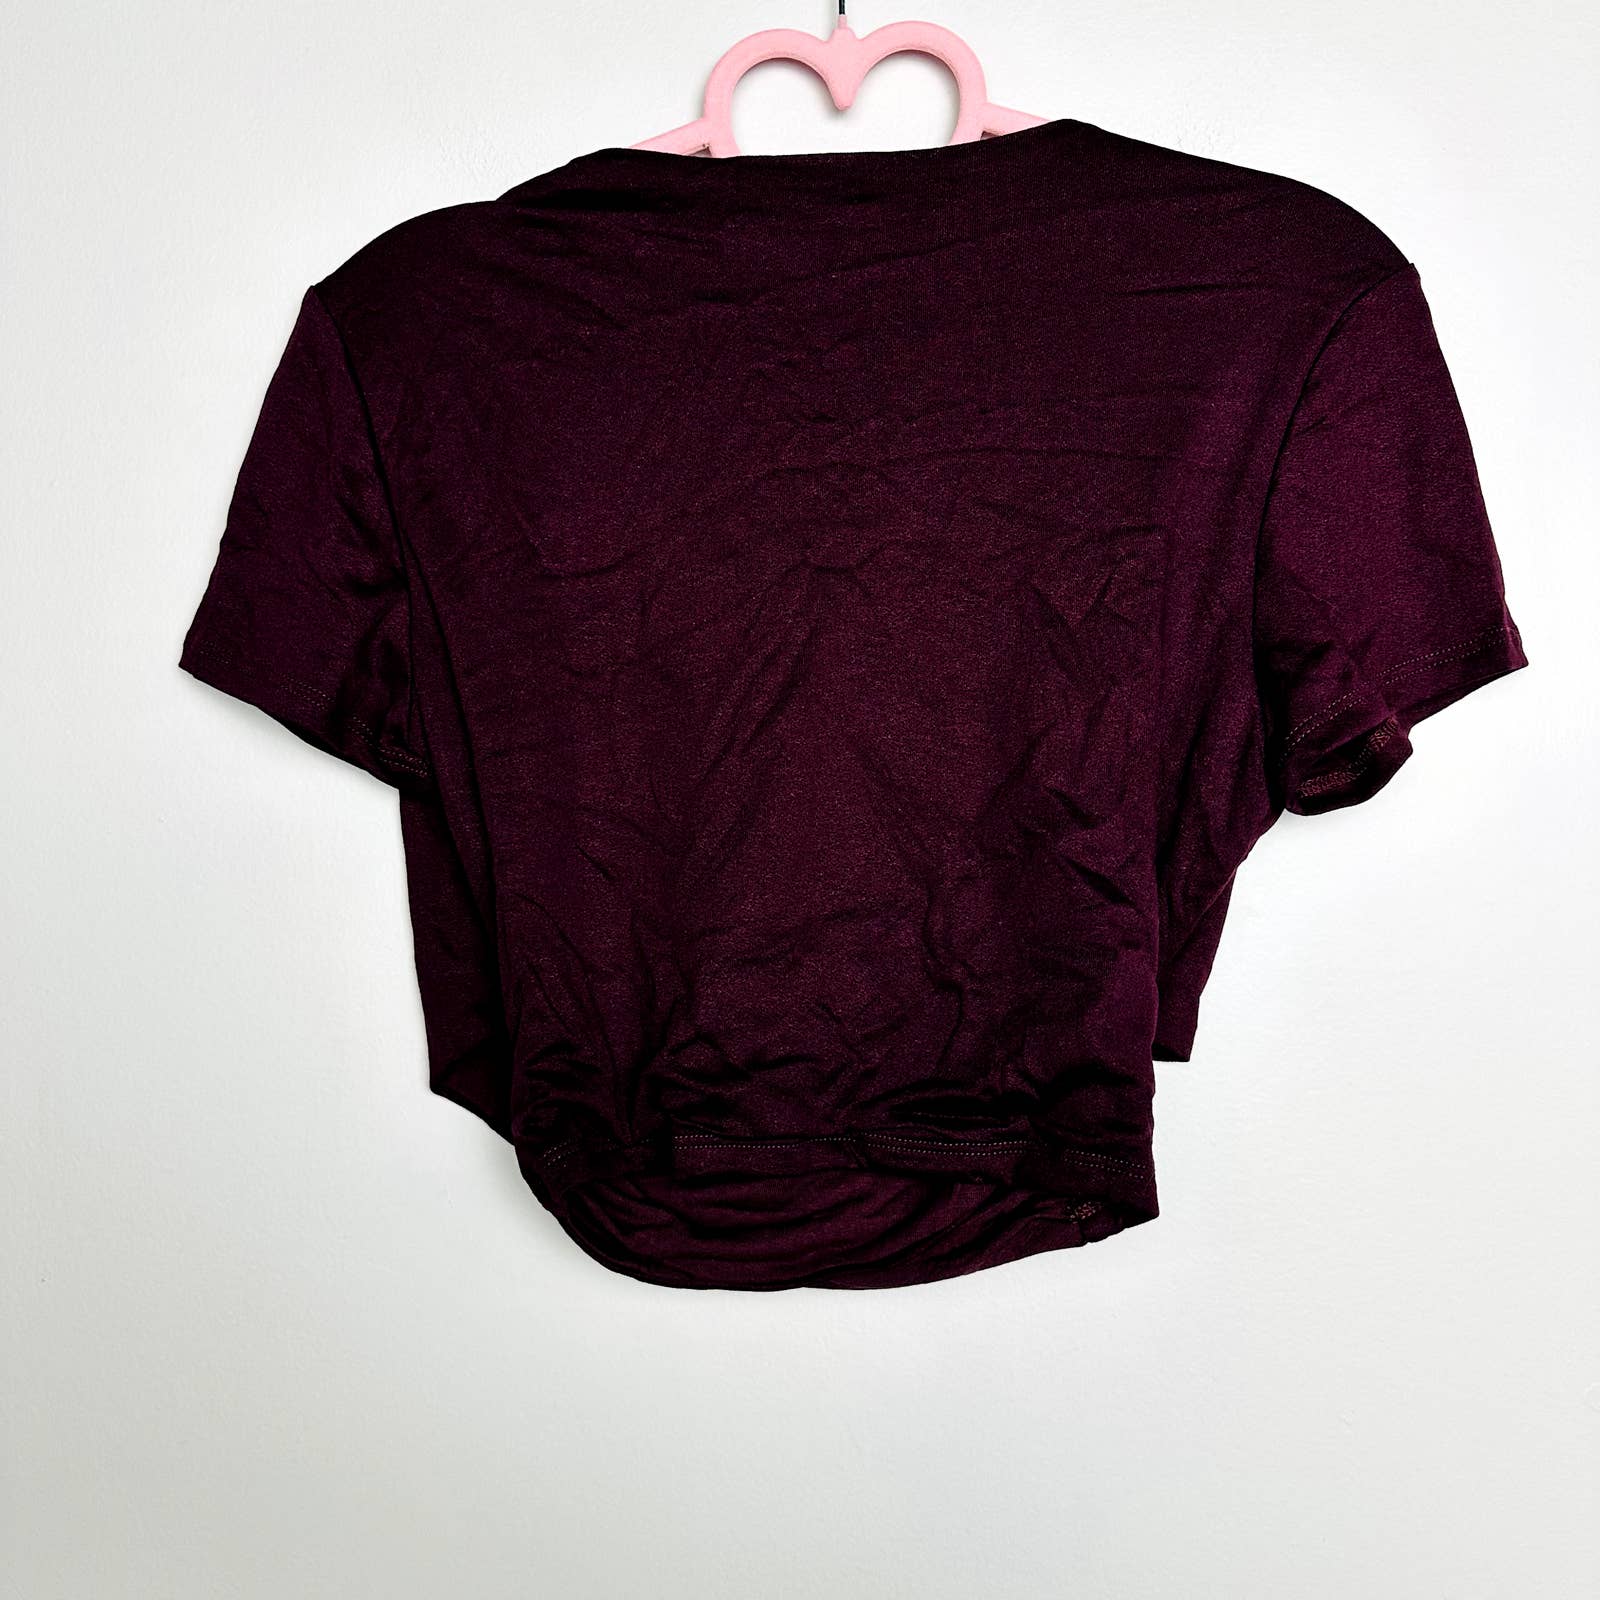 Lulus NWT By Your Side Wrap Cross Front Short Sleeve Cropped Top Wine Size Large